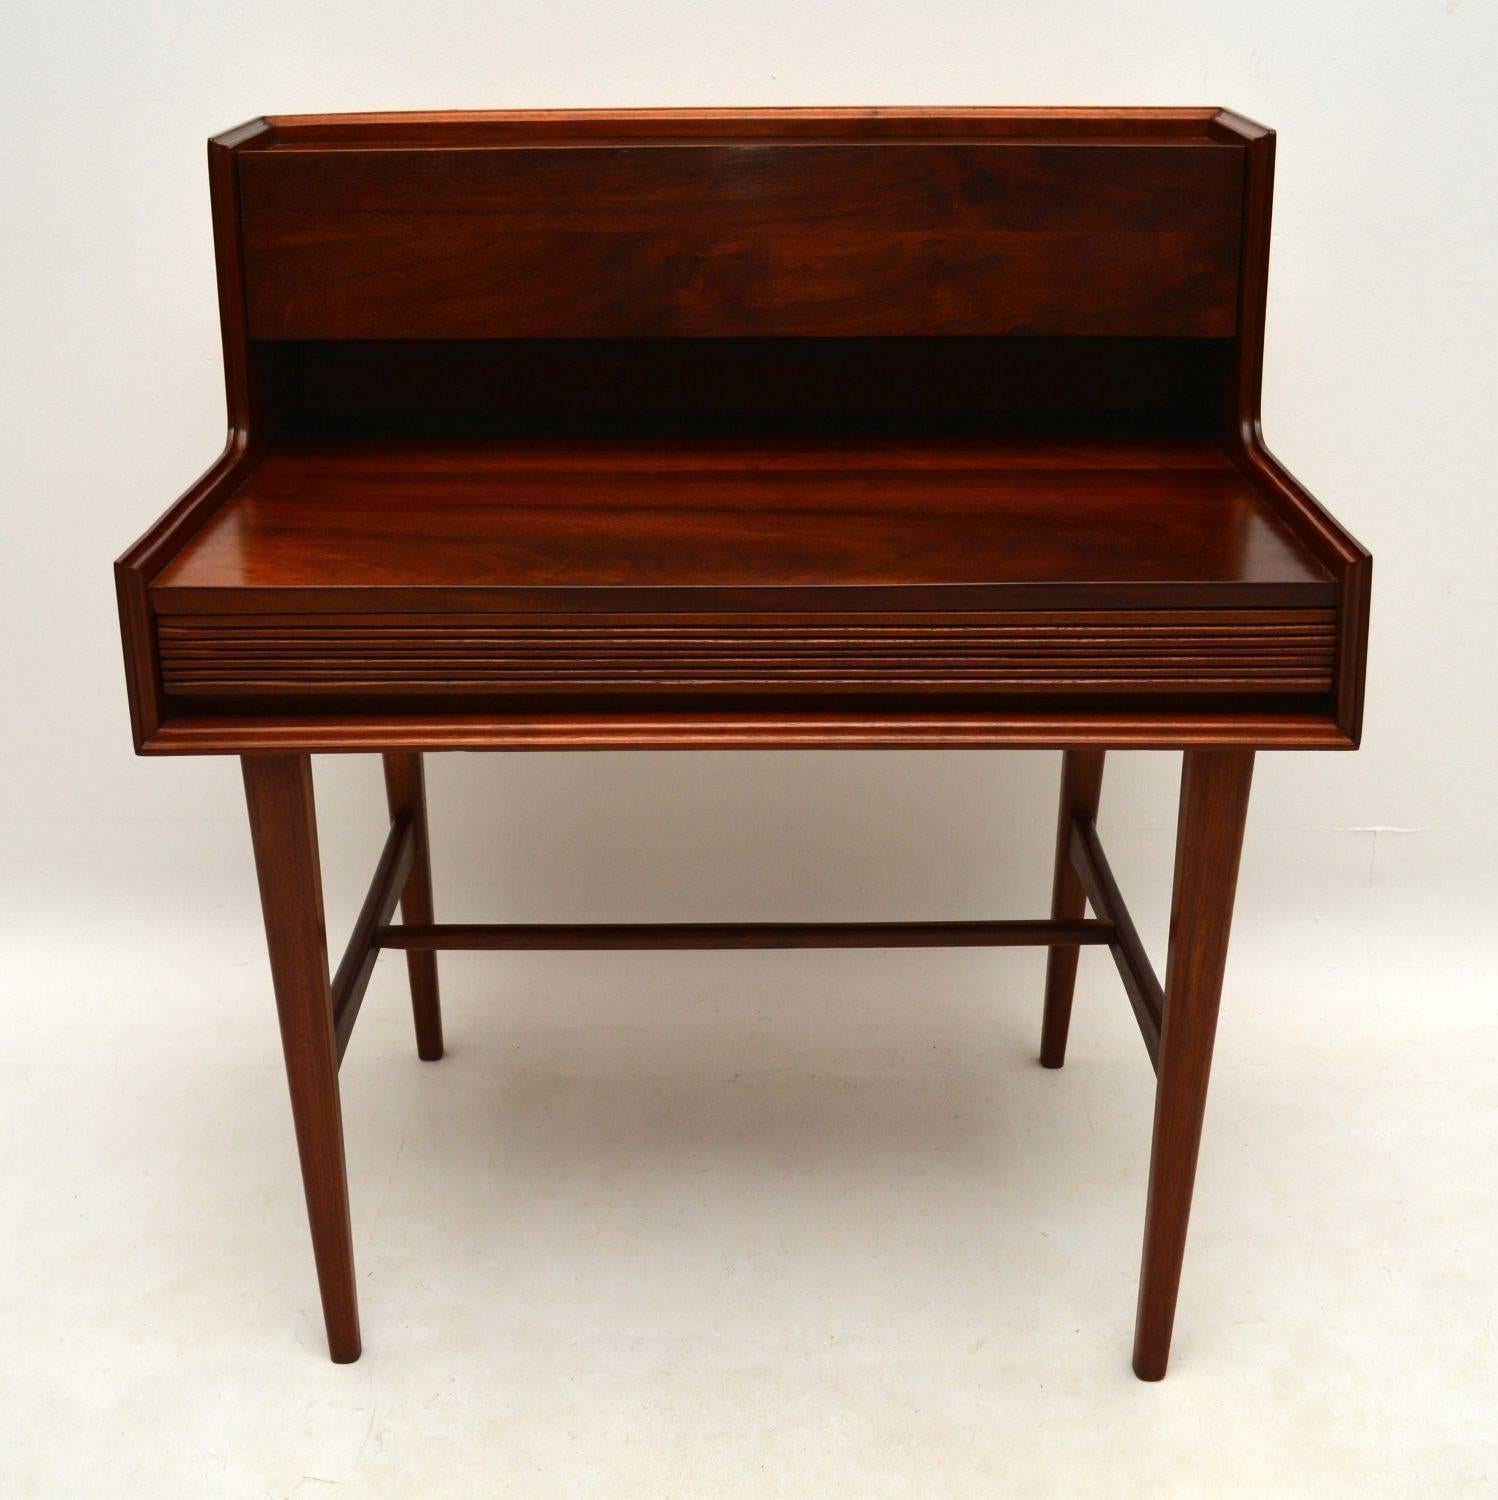 A beautiful vintage desk, this dates from the 1950s-1960s. These are usually seen in Afromosia and even those are quite rare, we have never seen one like this in Walnut. It has plenty of work space and also a long storage cabinet in the top. We have